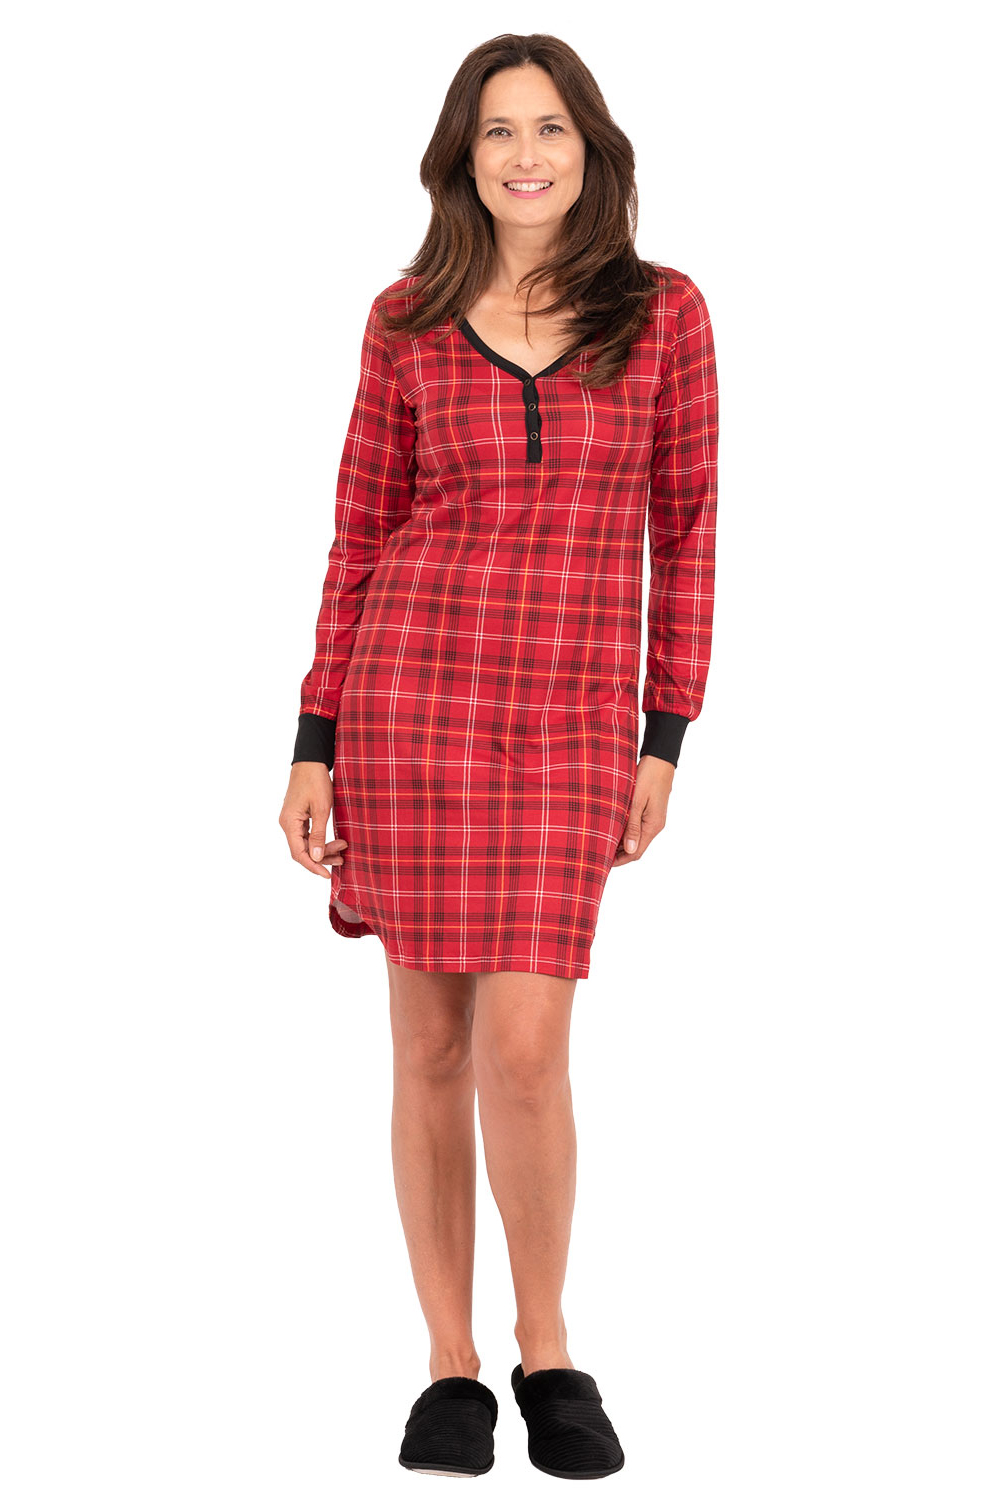 Soft touch, long sleeve v-neck sleepshirt with snap button detail, red plaid, medium (M)